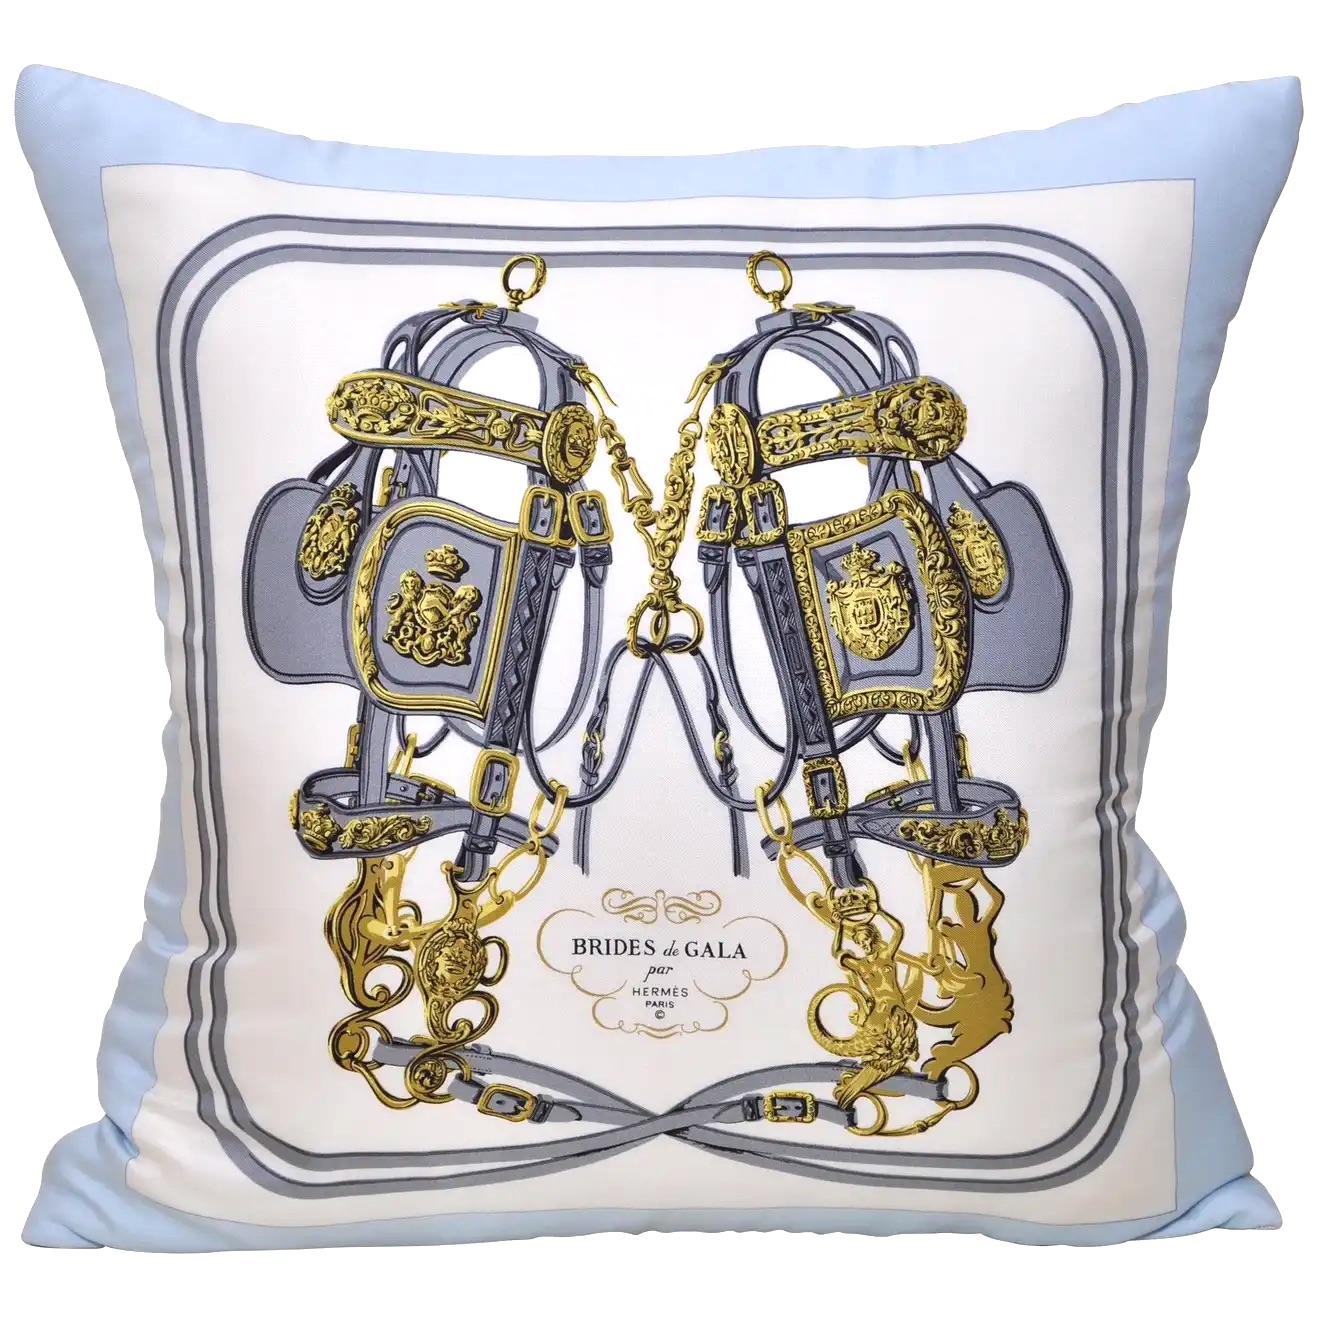 Vintage Hermes French Silk Scarf and Irish Linen Cushion Pillow Blue Gold